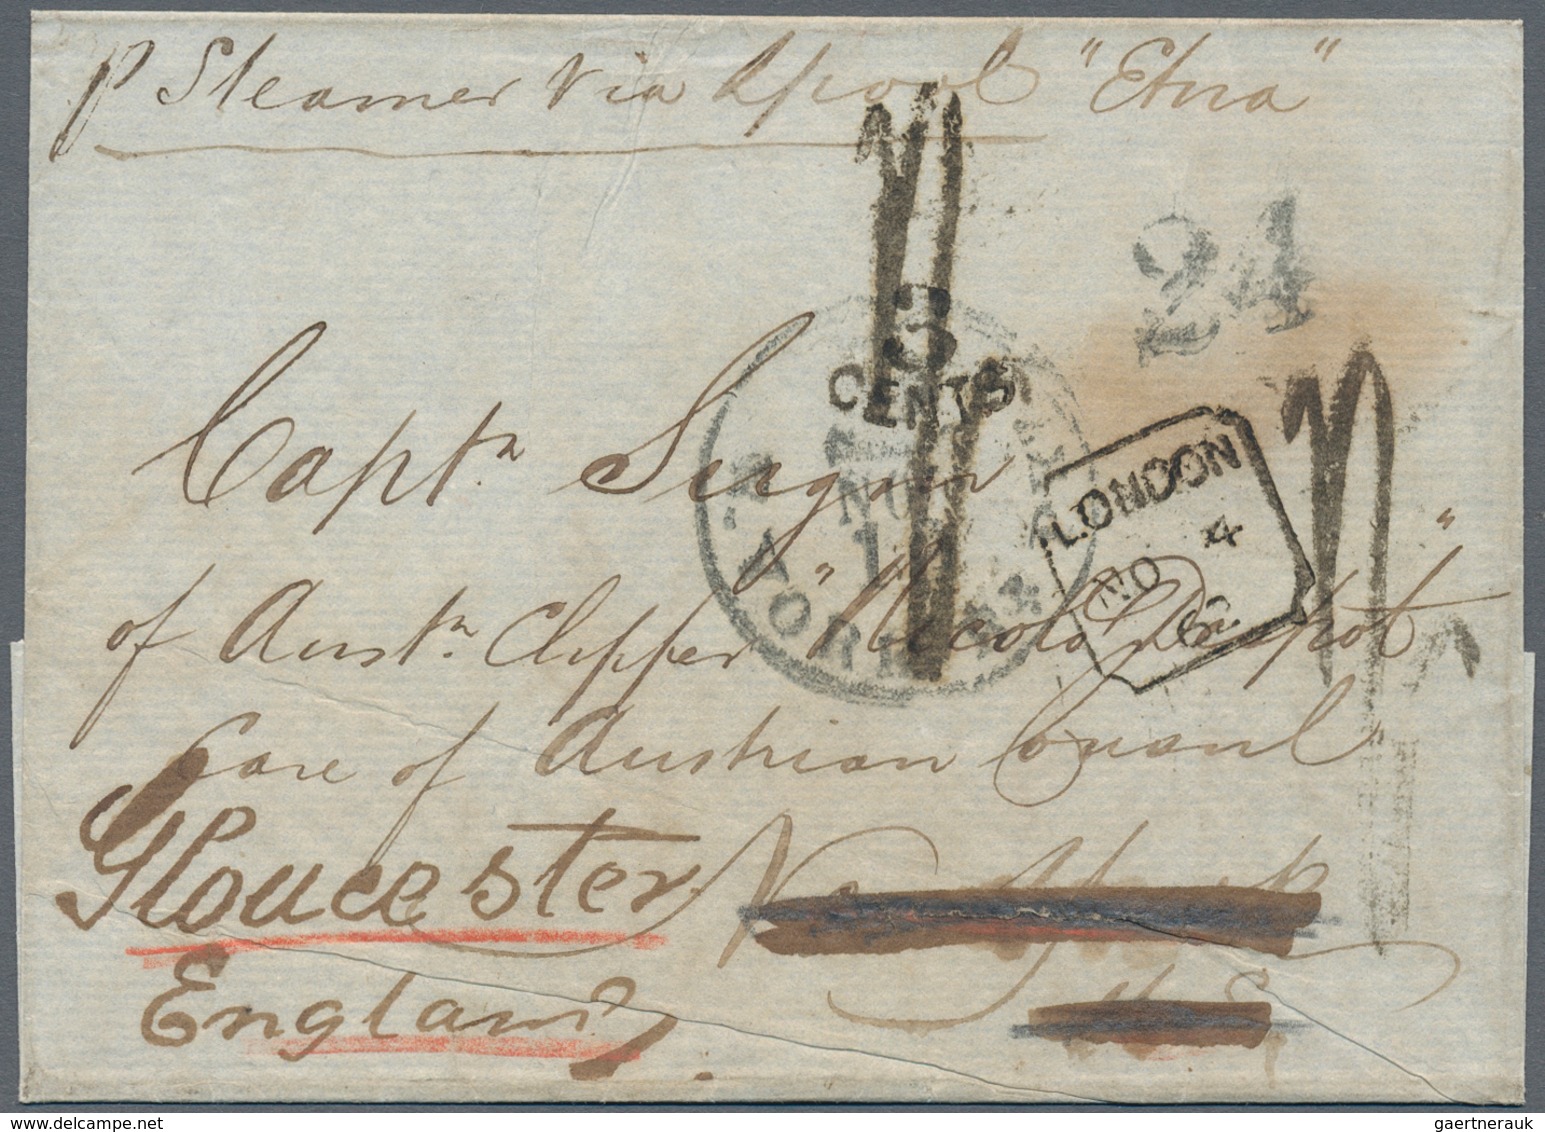 Transatlantikmail: 1840-62: Four stampless covers from/to the U.S.A. related to Austria including tw